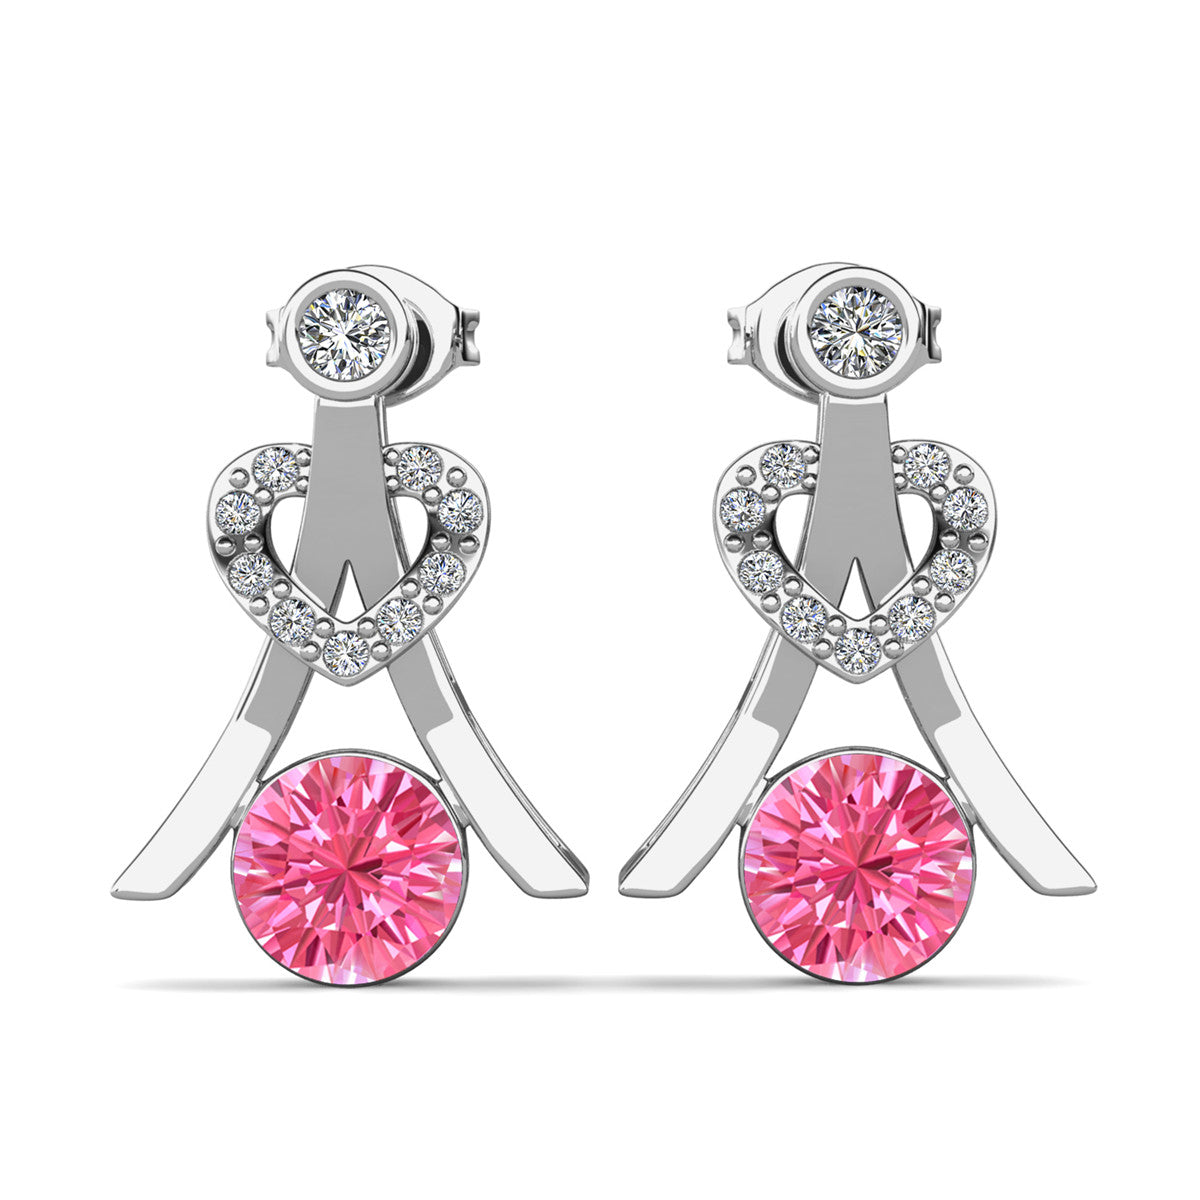 Serenity October Birthstone Pink Tourmaline Earrings, 18k White Gold Plated Silver Earrings with Round Cut Crystals